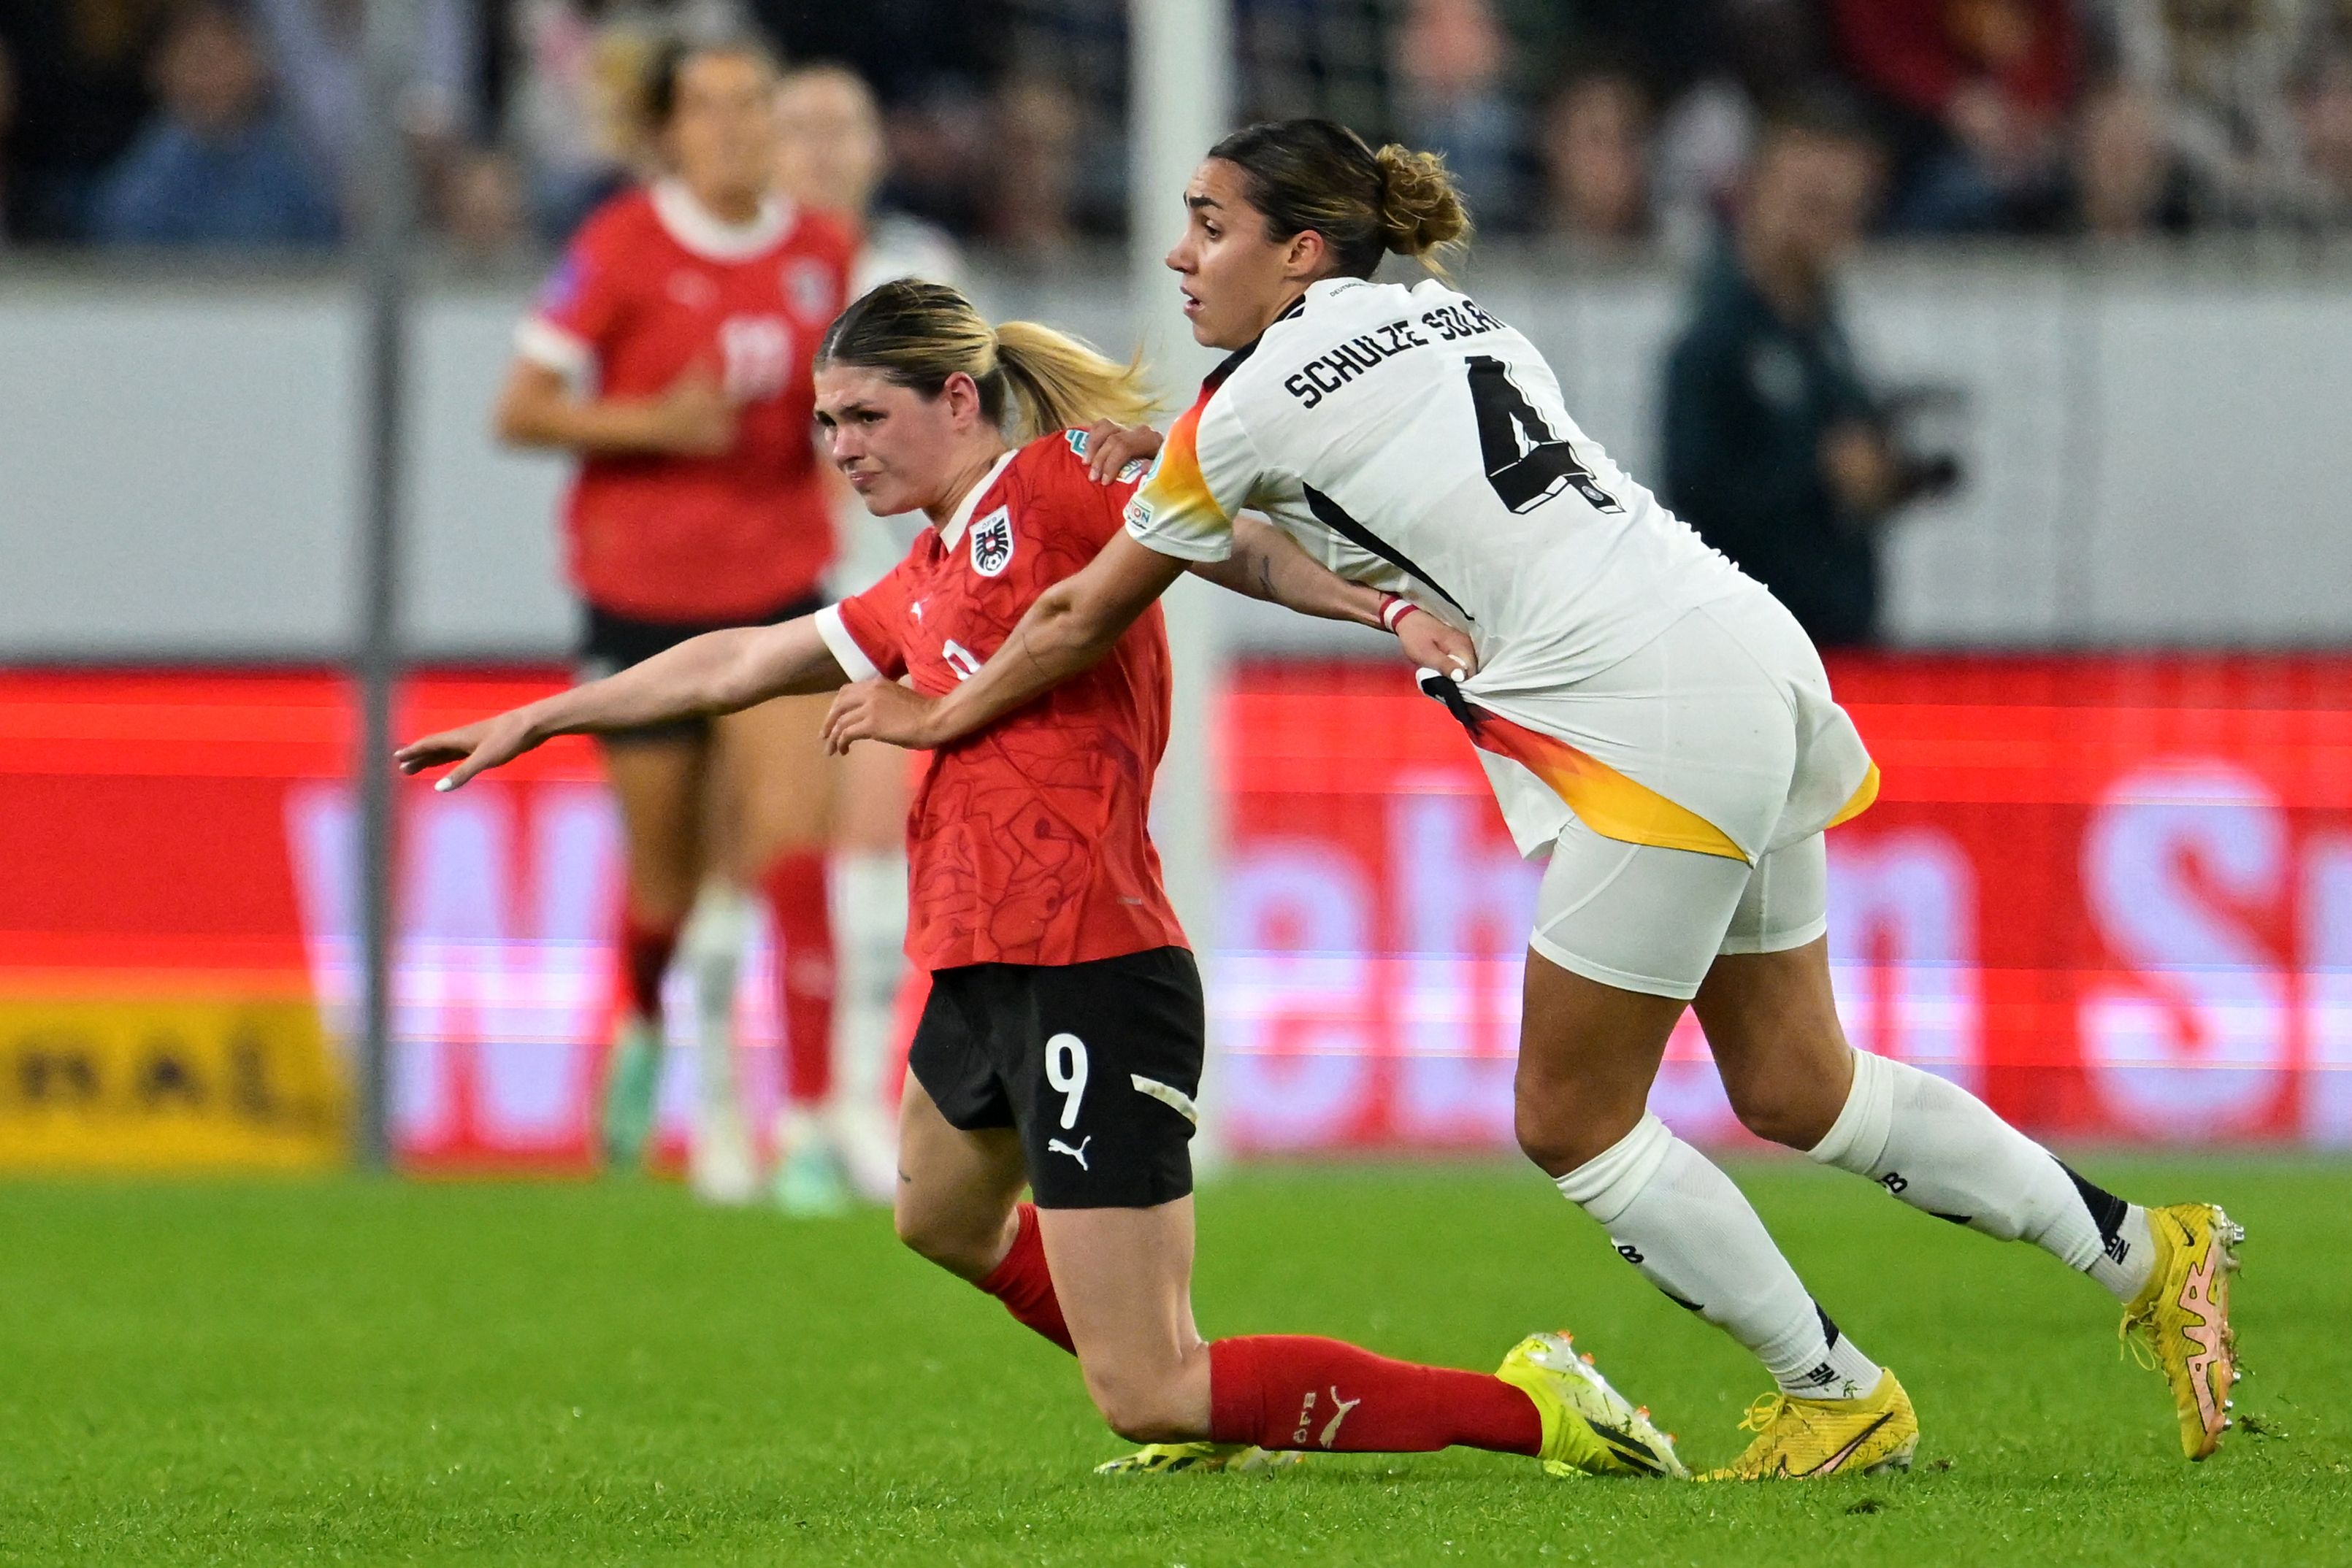 Austria's forward #09 Eileen Campbell (L) is fouled by Germany's defender #04 Bibiane Schulze Solano during the UEFA Women's Euro 2025 qualifying football match between Austria and Germany in Linz, Austria on April 5, 2024. (Photo by Joe Klamar / AFP)